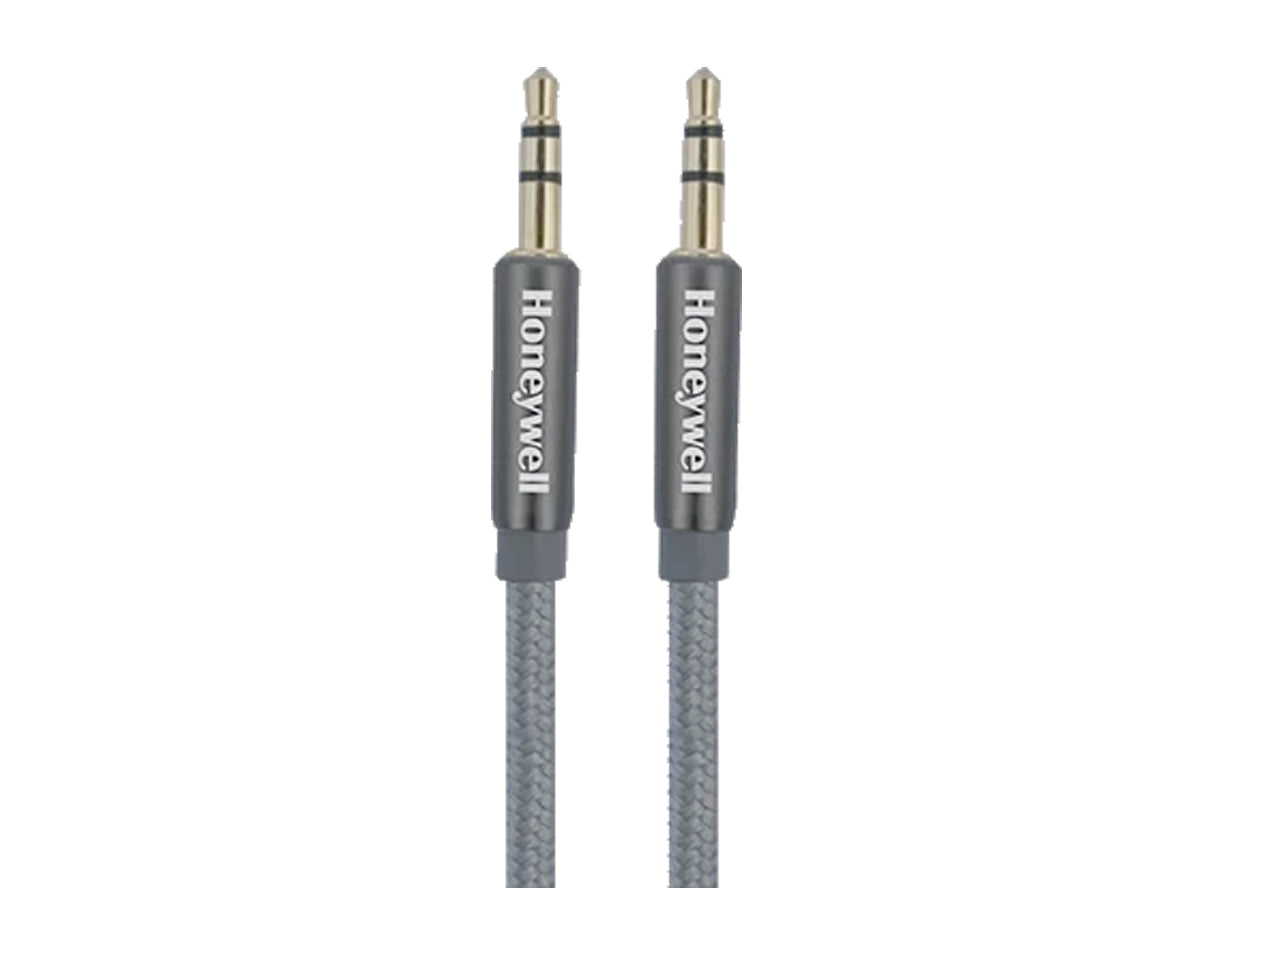 Honeywell Audio Aux Cable 3.5 mm (Braided) Grey